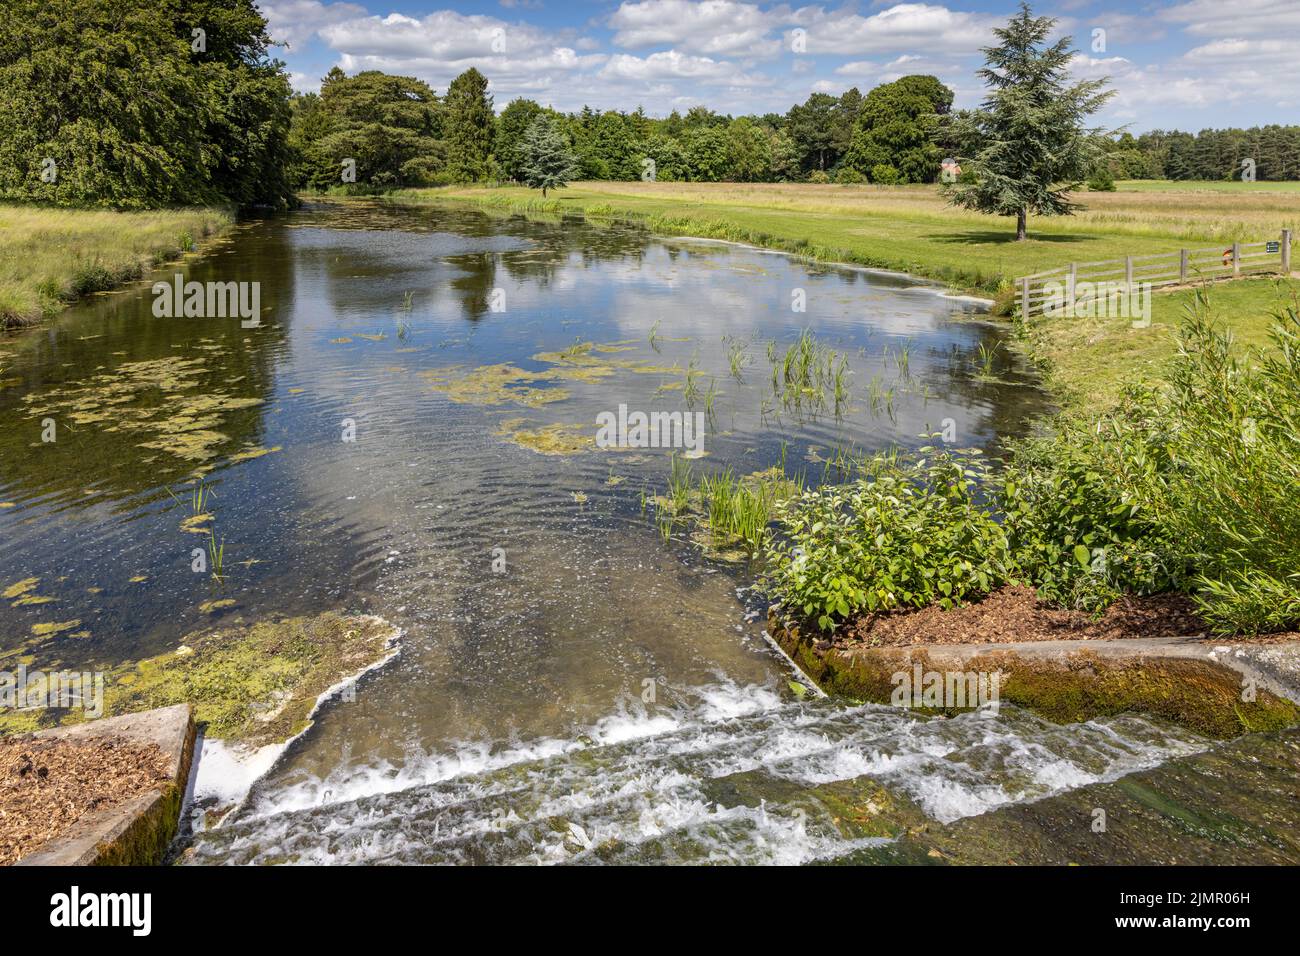 Parkland and and wier at Scampston, designed by Capability Brown, Scampston Hall, North Yorkshire, England. Stockfoto